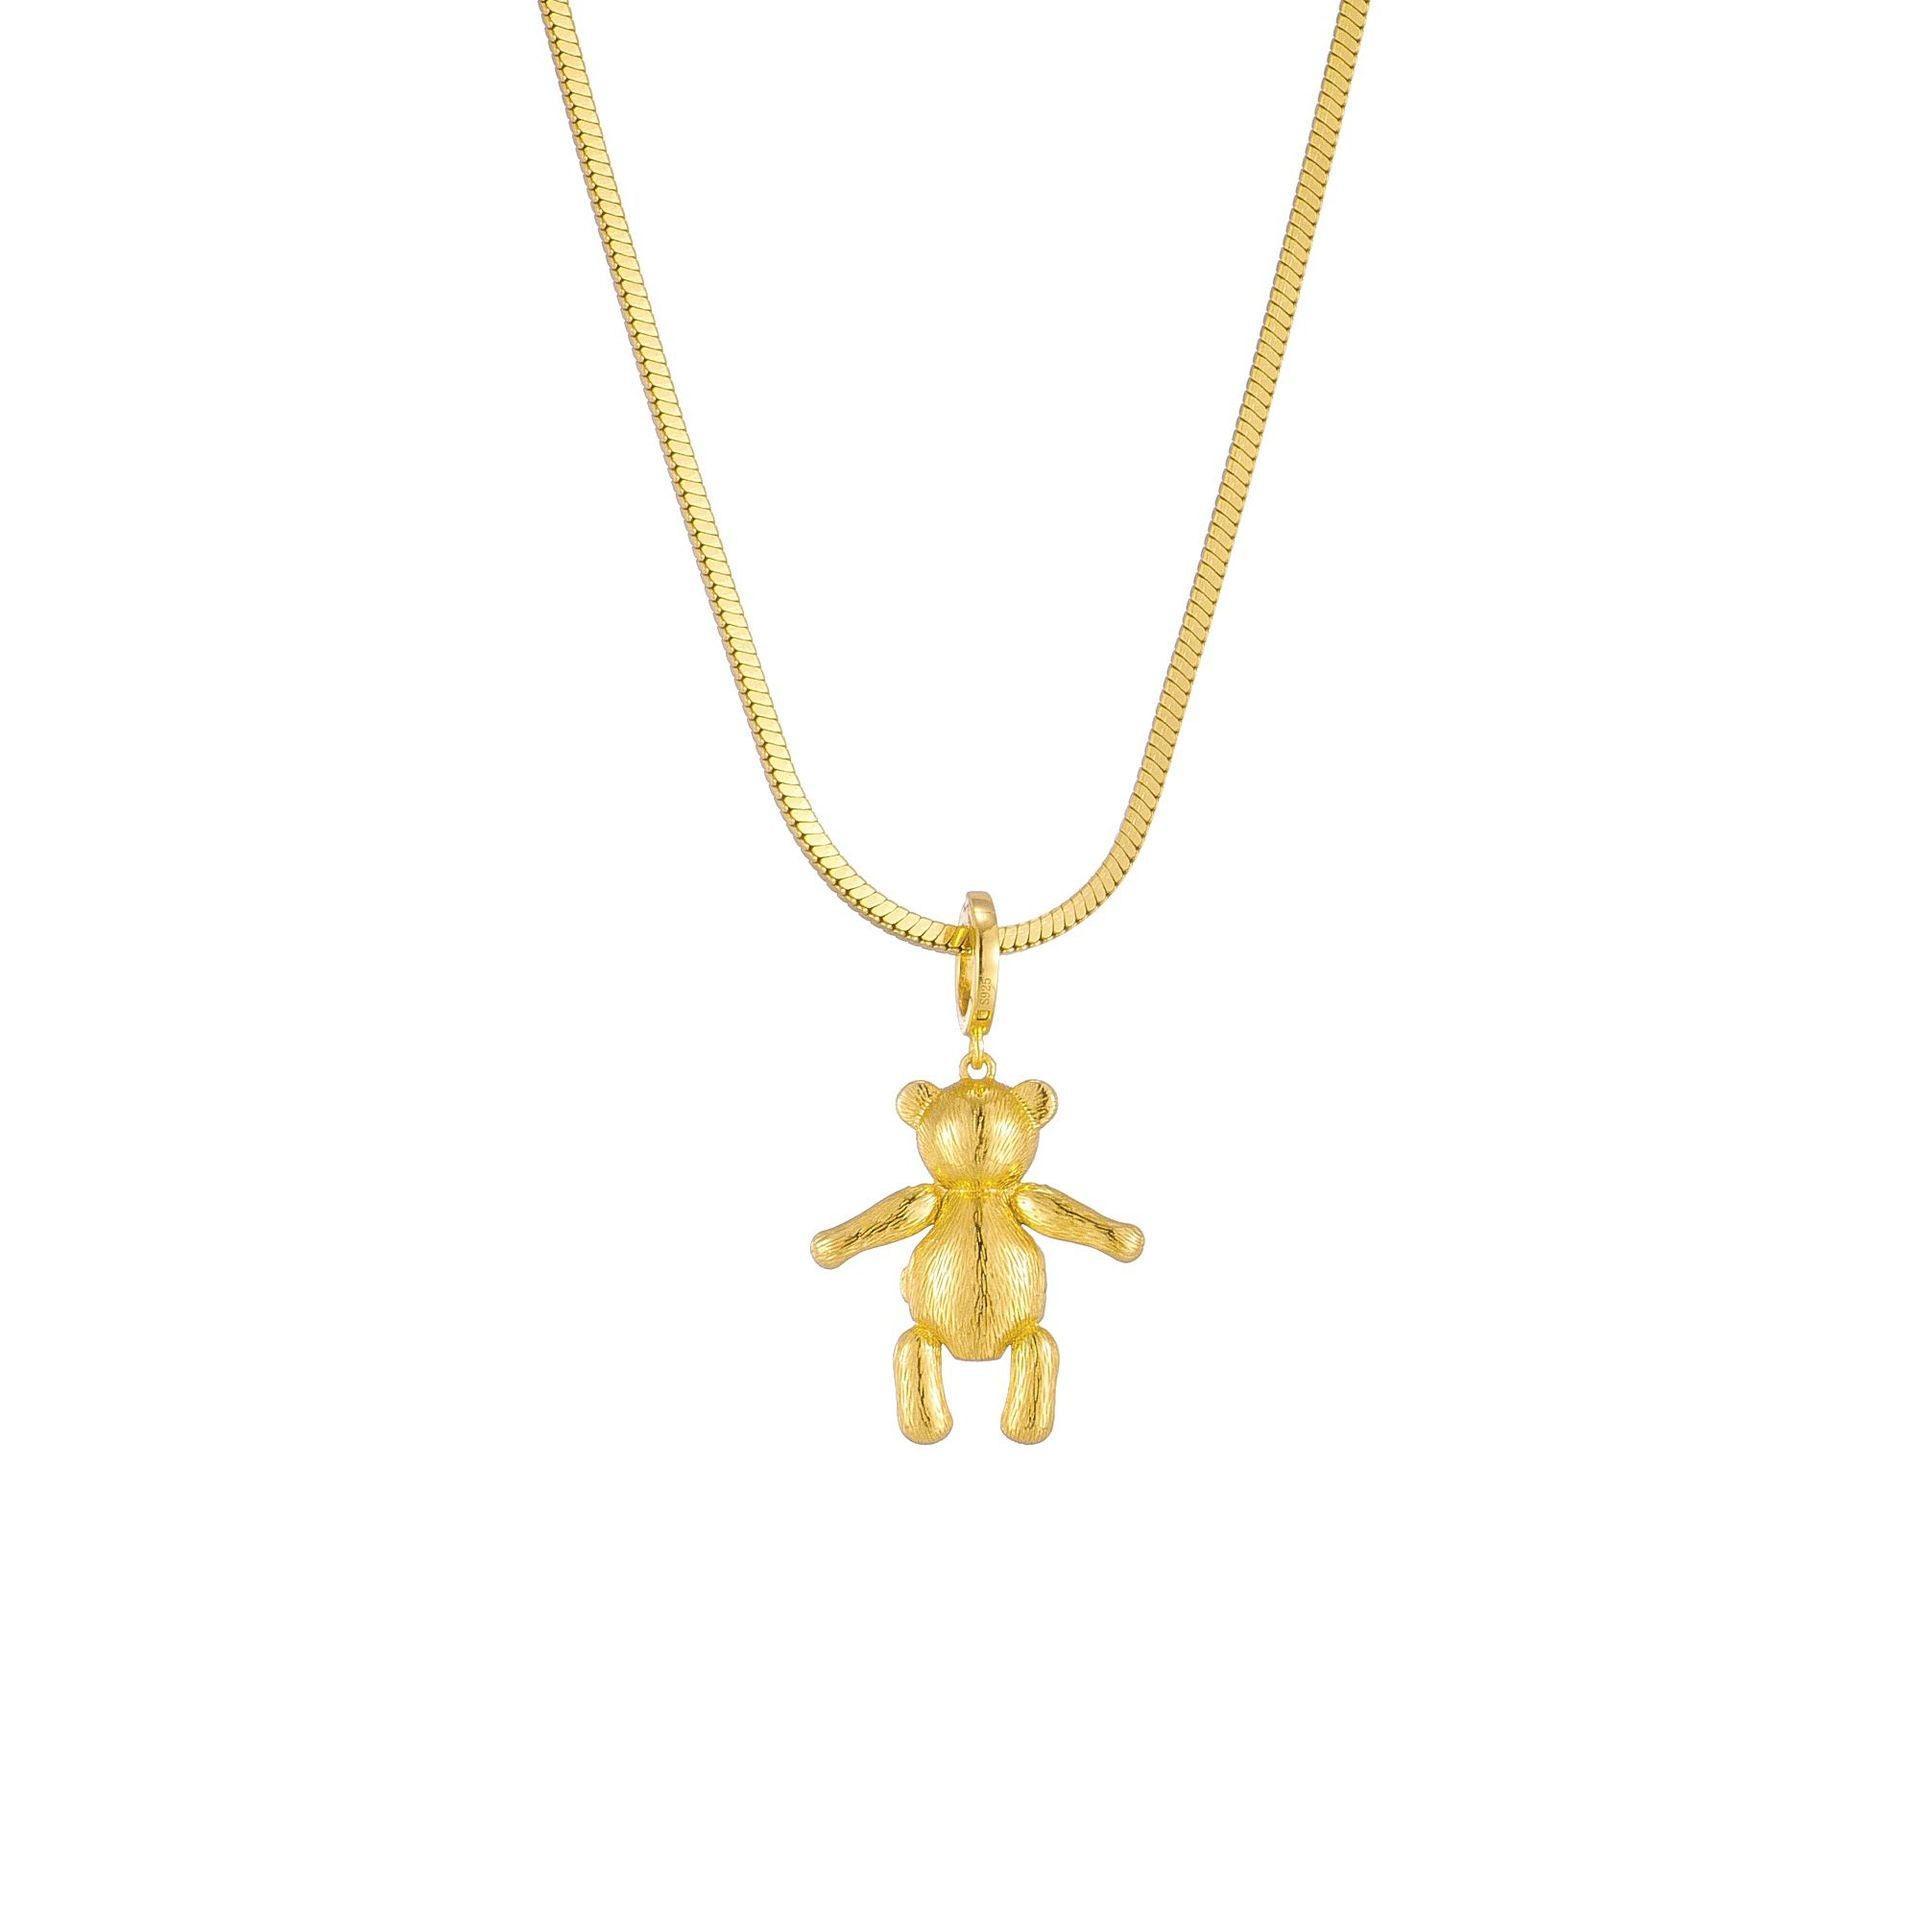 Fashionable New Cute Bear Pendant Necklace for Christmas 2023 | Fashionable New Cute Bear Pendant Necklace - undefined | Bear Necklace, Cute Bear Pendant Necklace, Gift Necklace, Necklaces | From Hunny Life | hunnylife.com